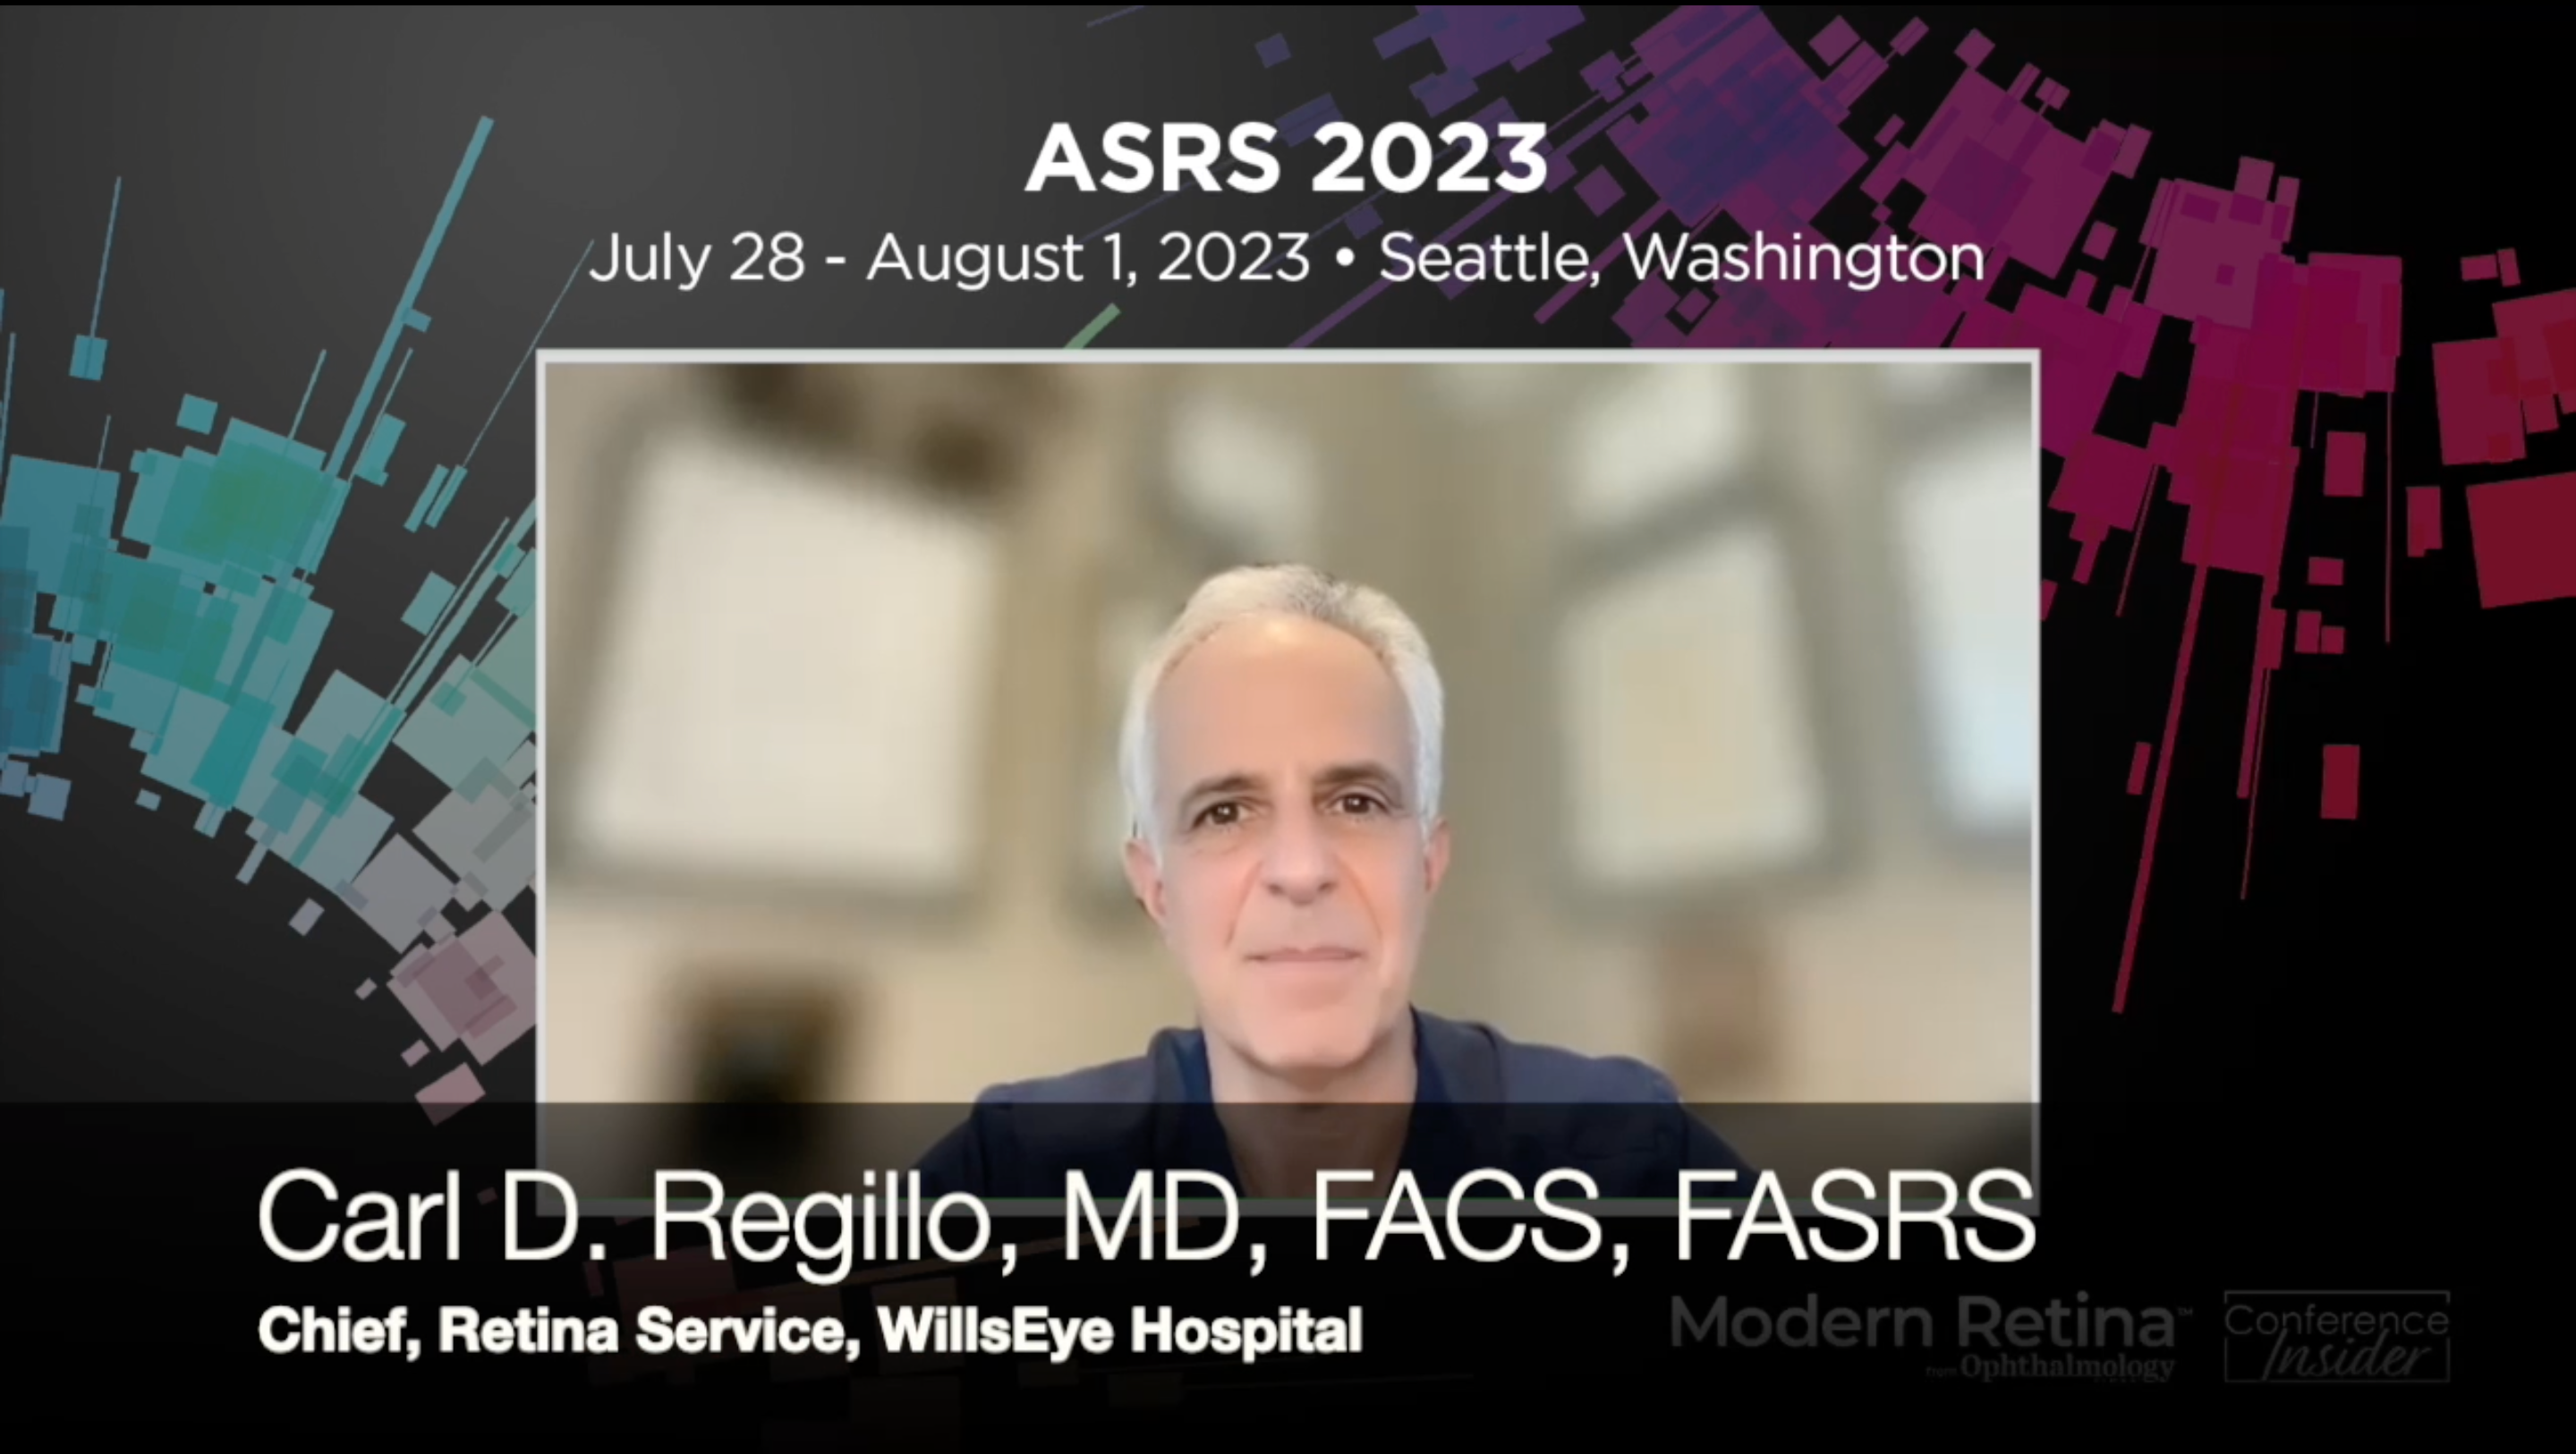 ASRS 2023: Insights on AVD-104, a sialic-acid coated nanoparticle therapeutic for geographic atrophy